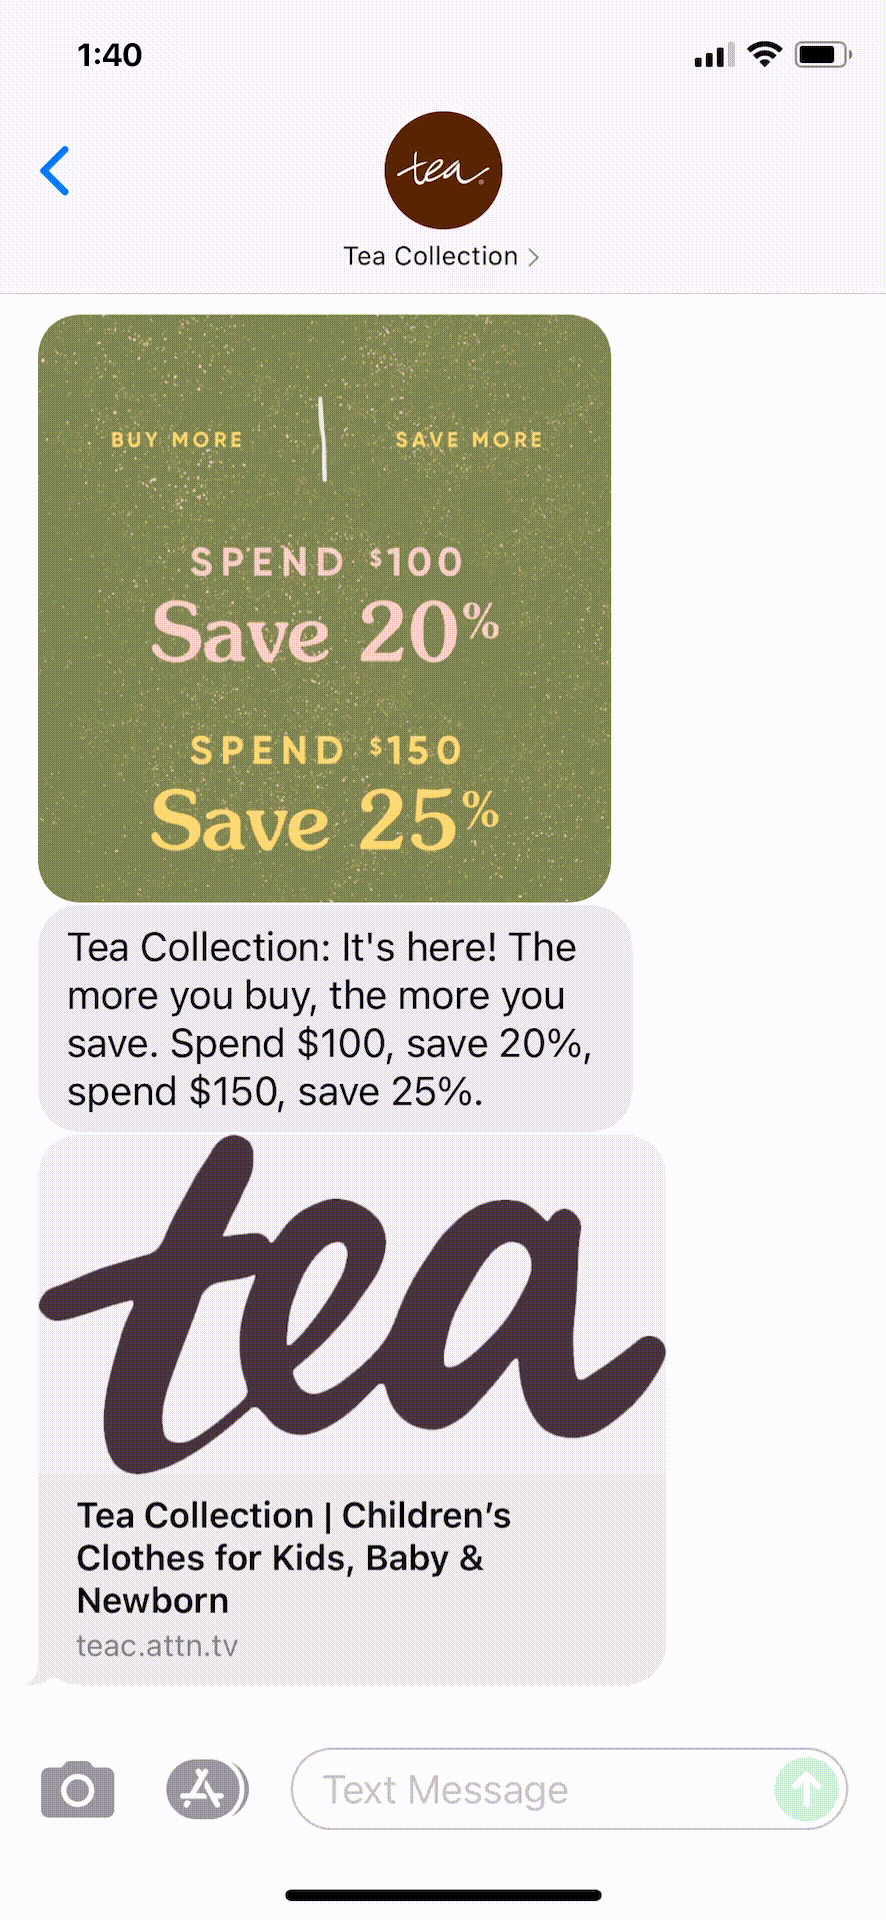 Tea-Collection-Text-Message-Marketing-Example-08.12.2021